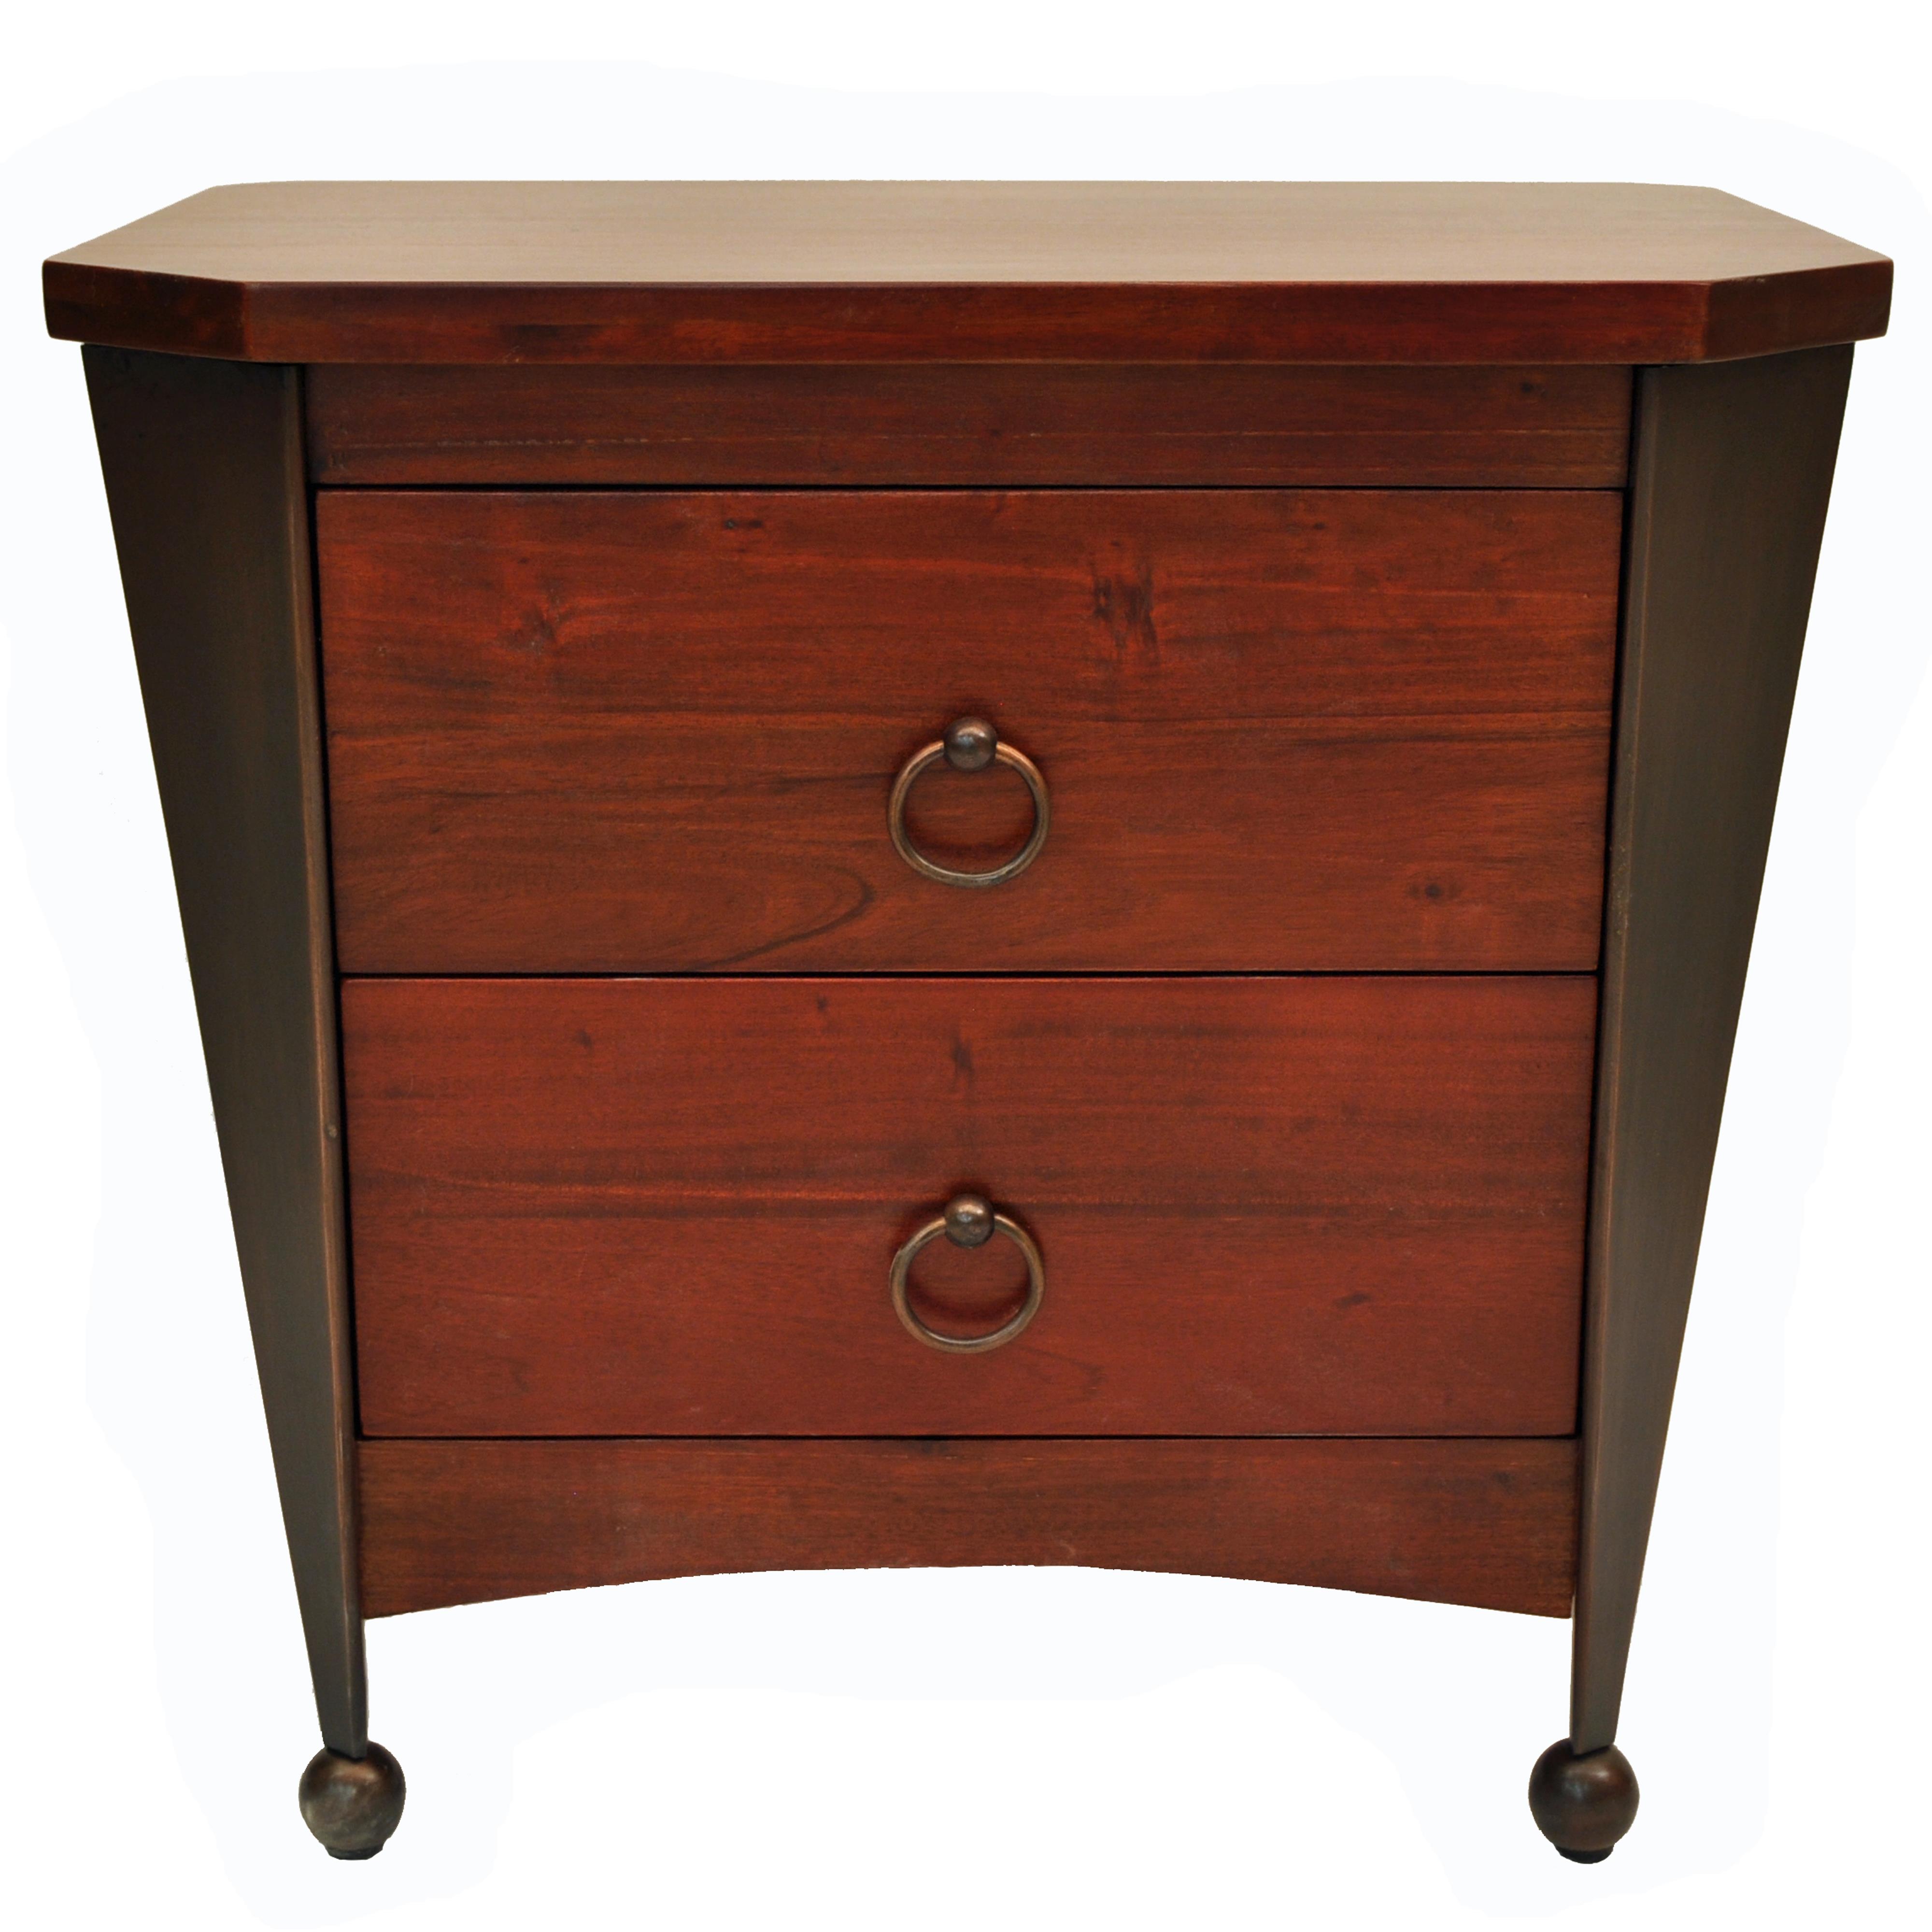 Eangee Home Victoria Night Table Cherry